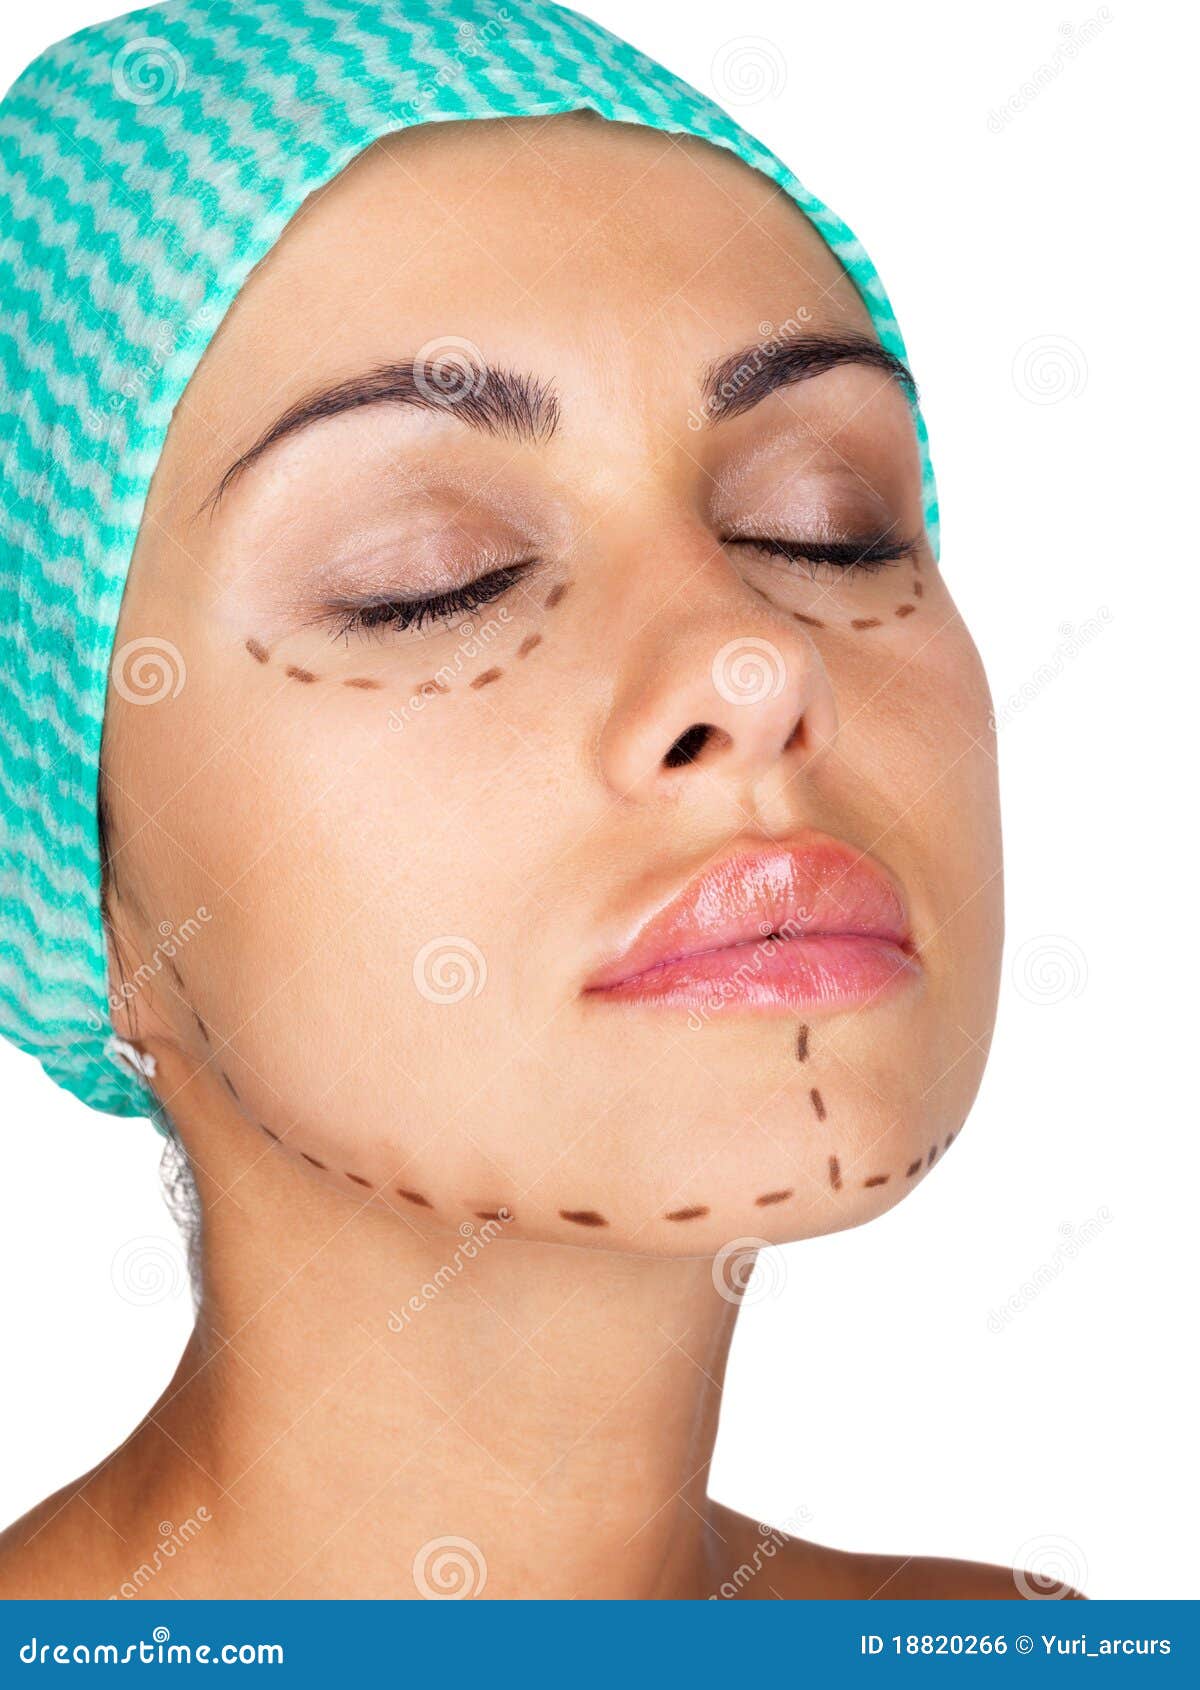 Clearwater facial plastic surgery